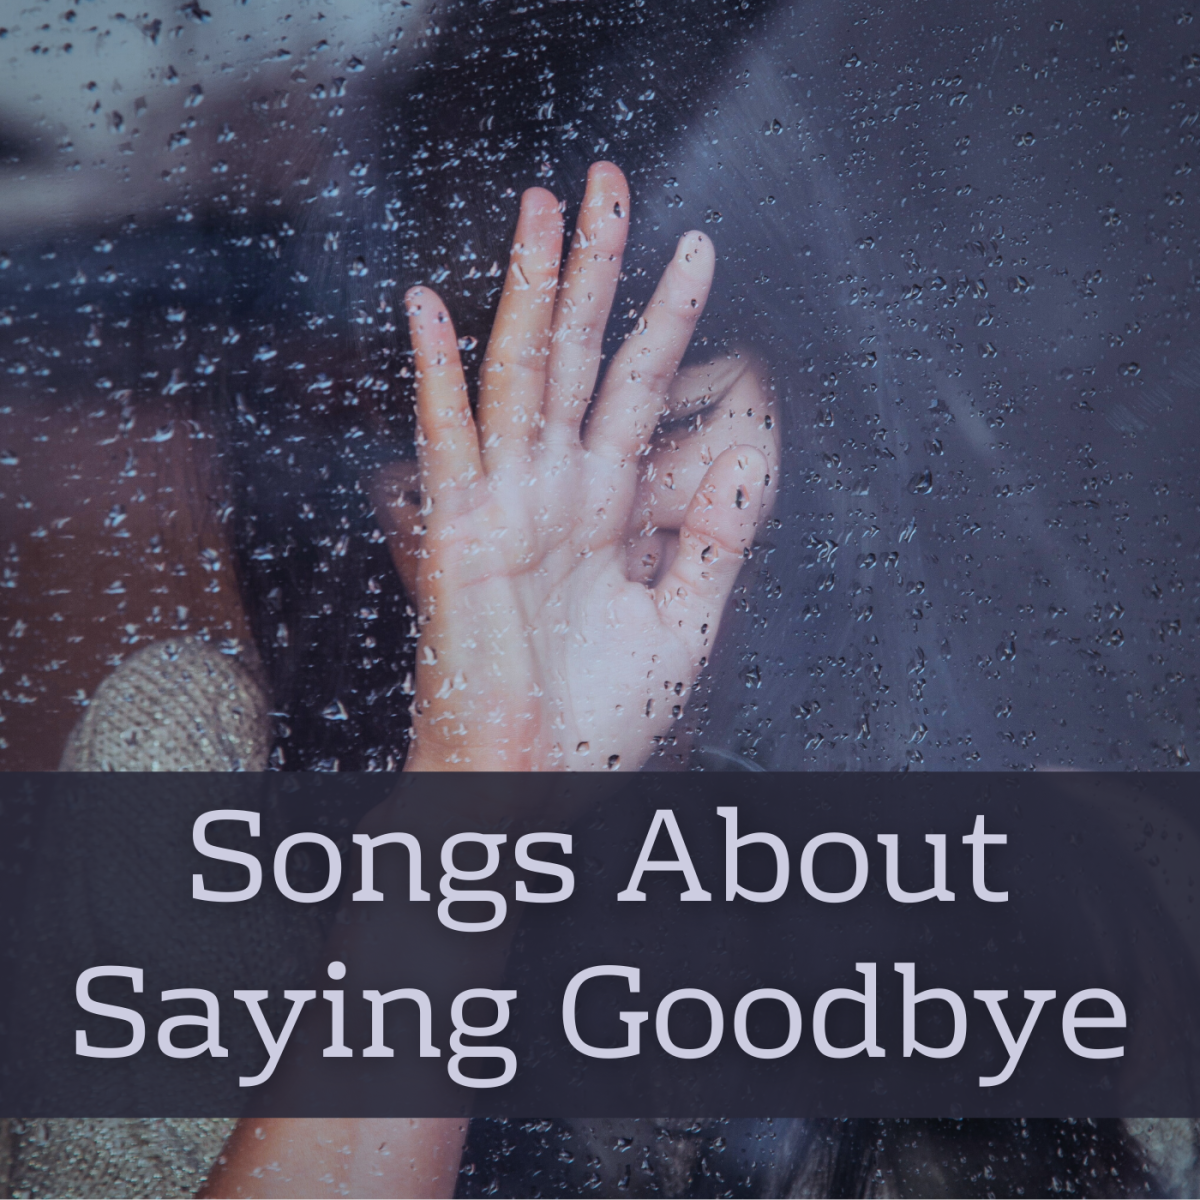 If you are saying goodbye to someone you know, we have a huge list of pop, rock, R&B, and country songs.